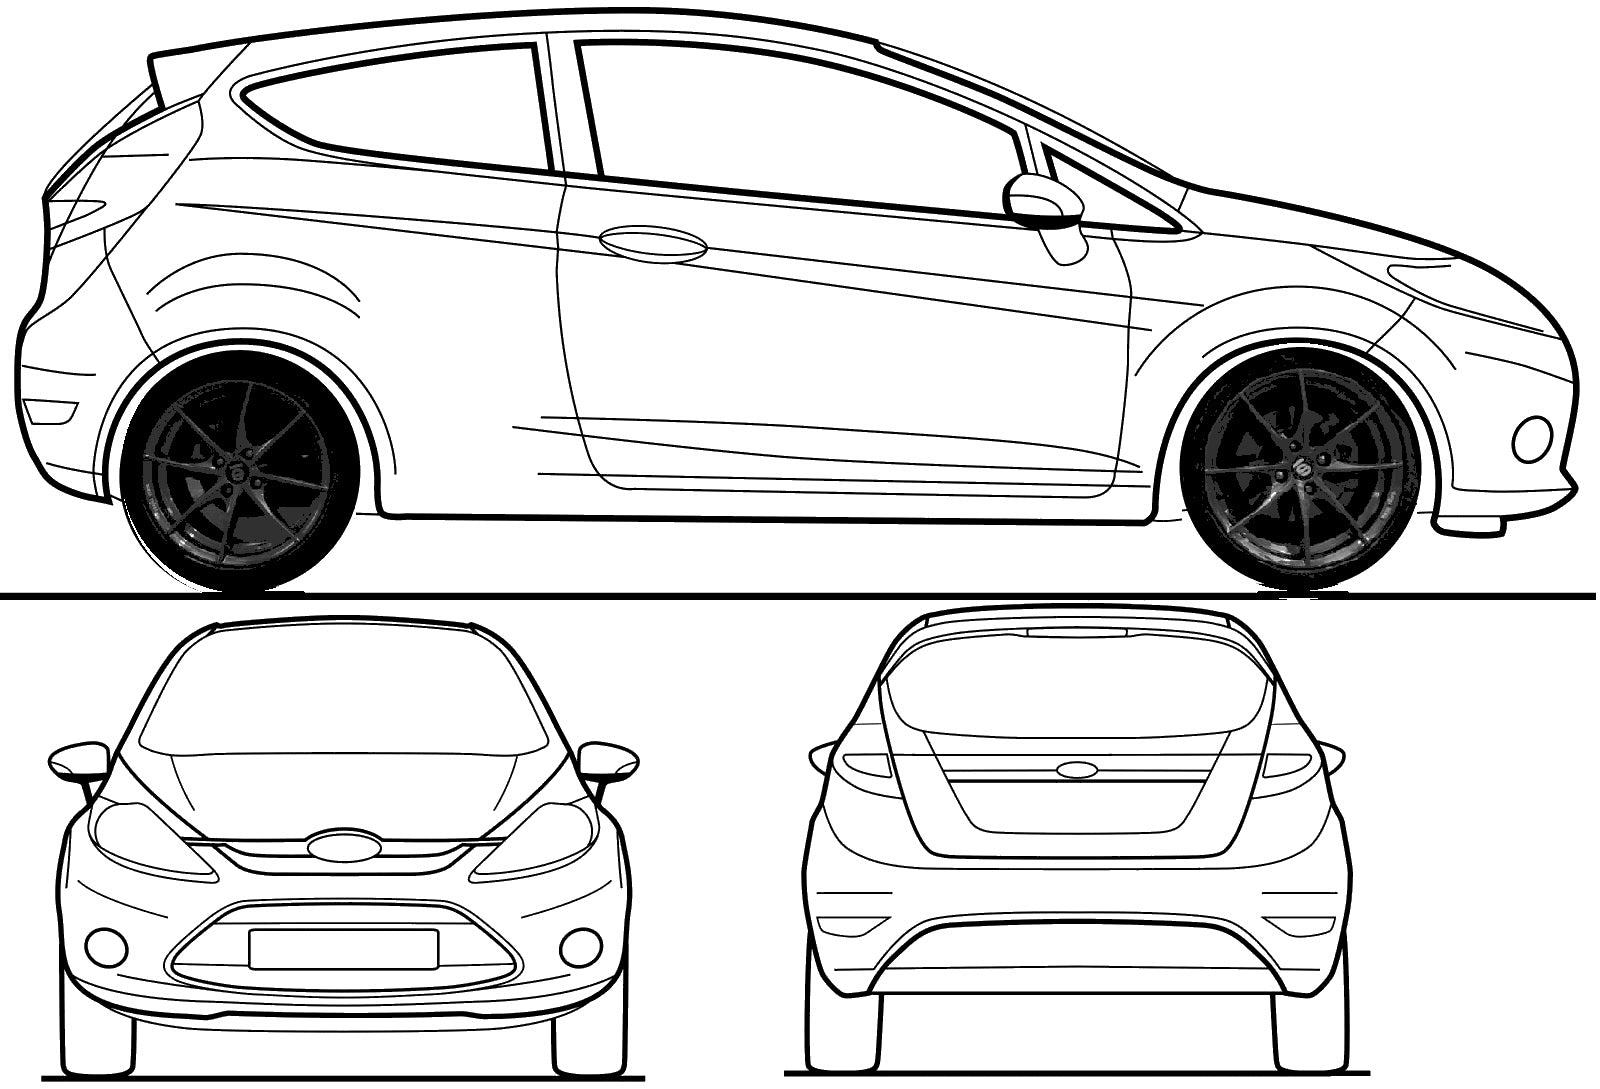 Steeda Fiesta ST Wrap Competition template for design